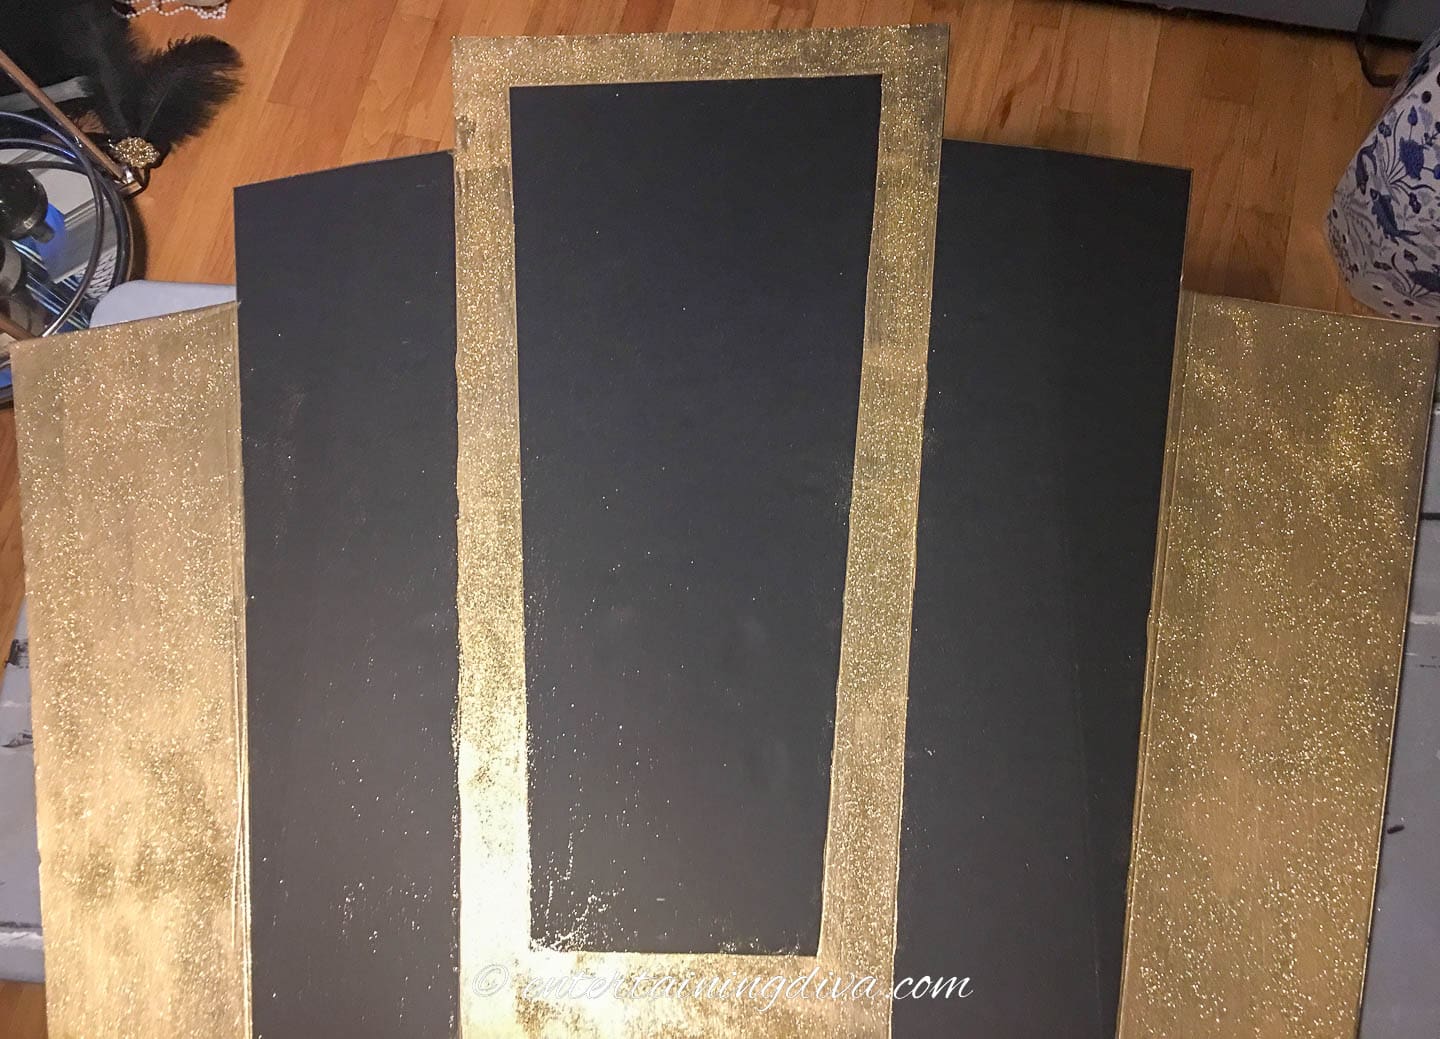 The art deco shaped foam board painted with gold